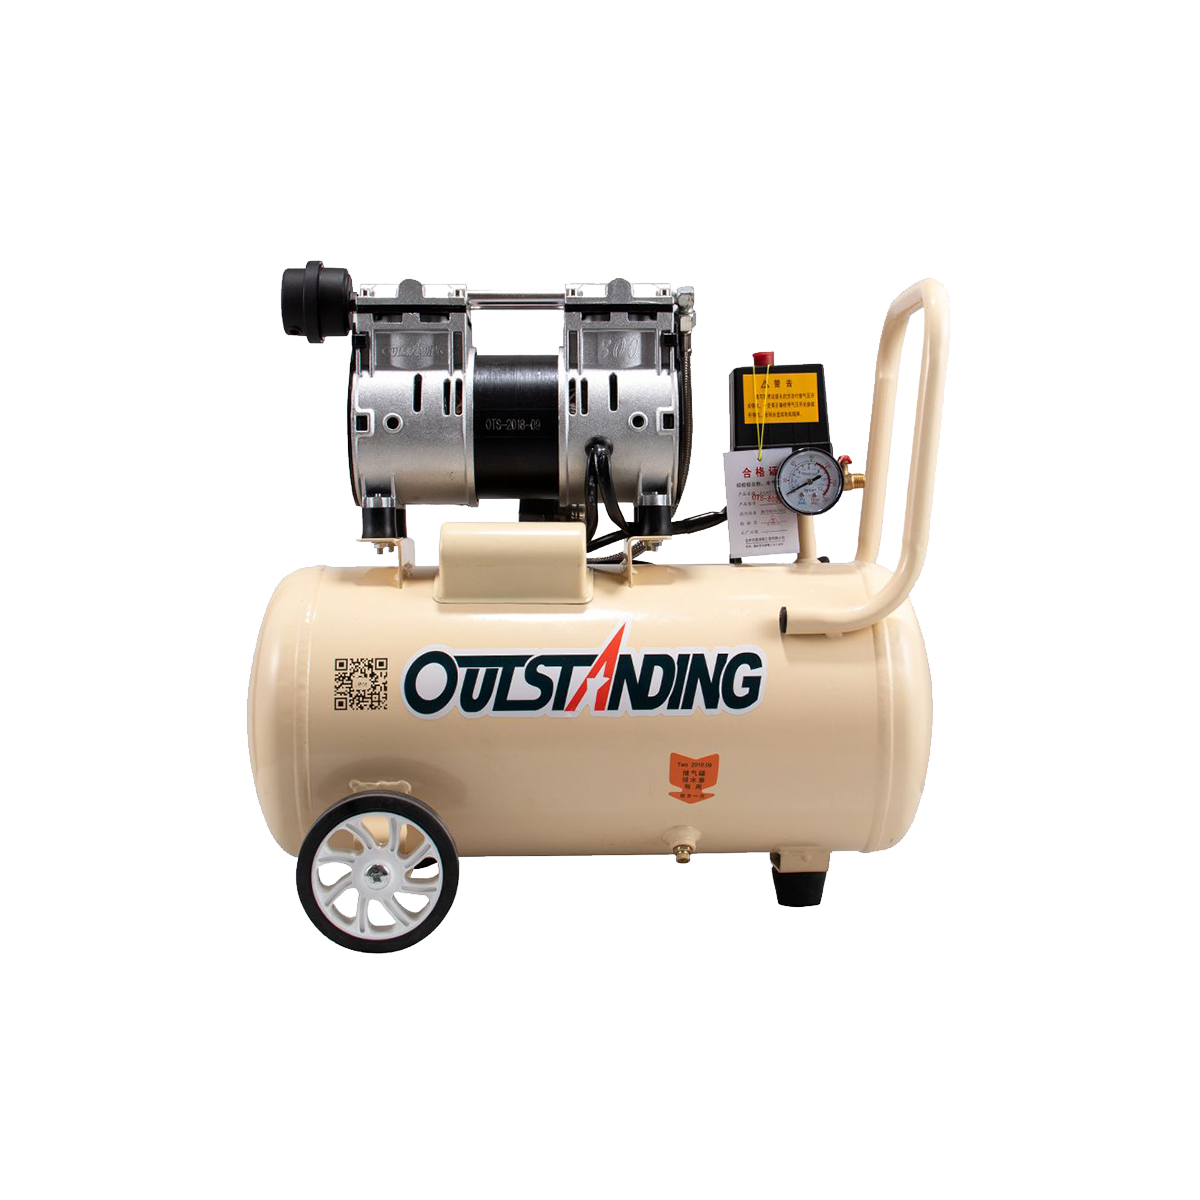 Outstanding 30L Oil Free Air Compressor